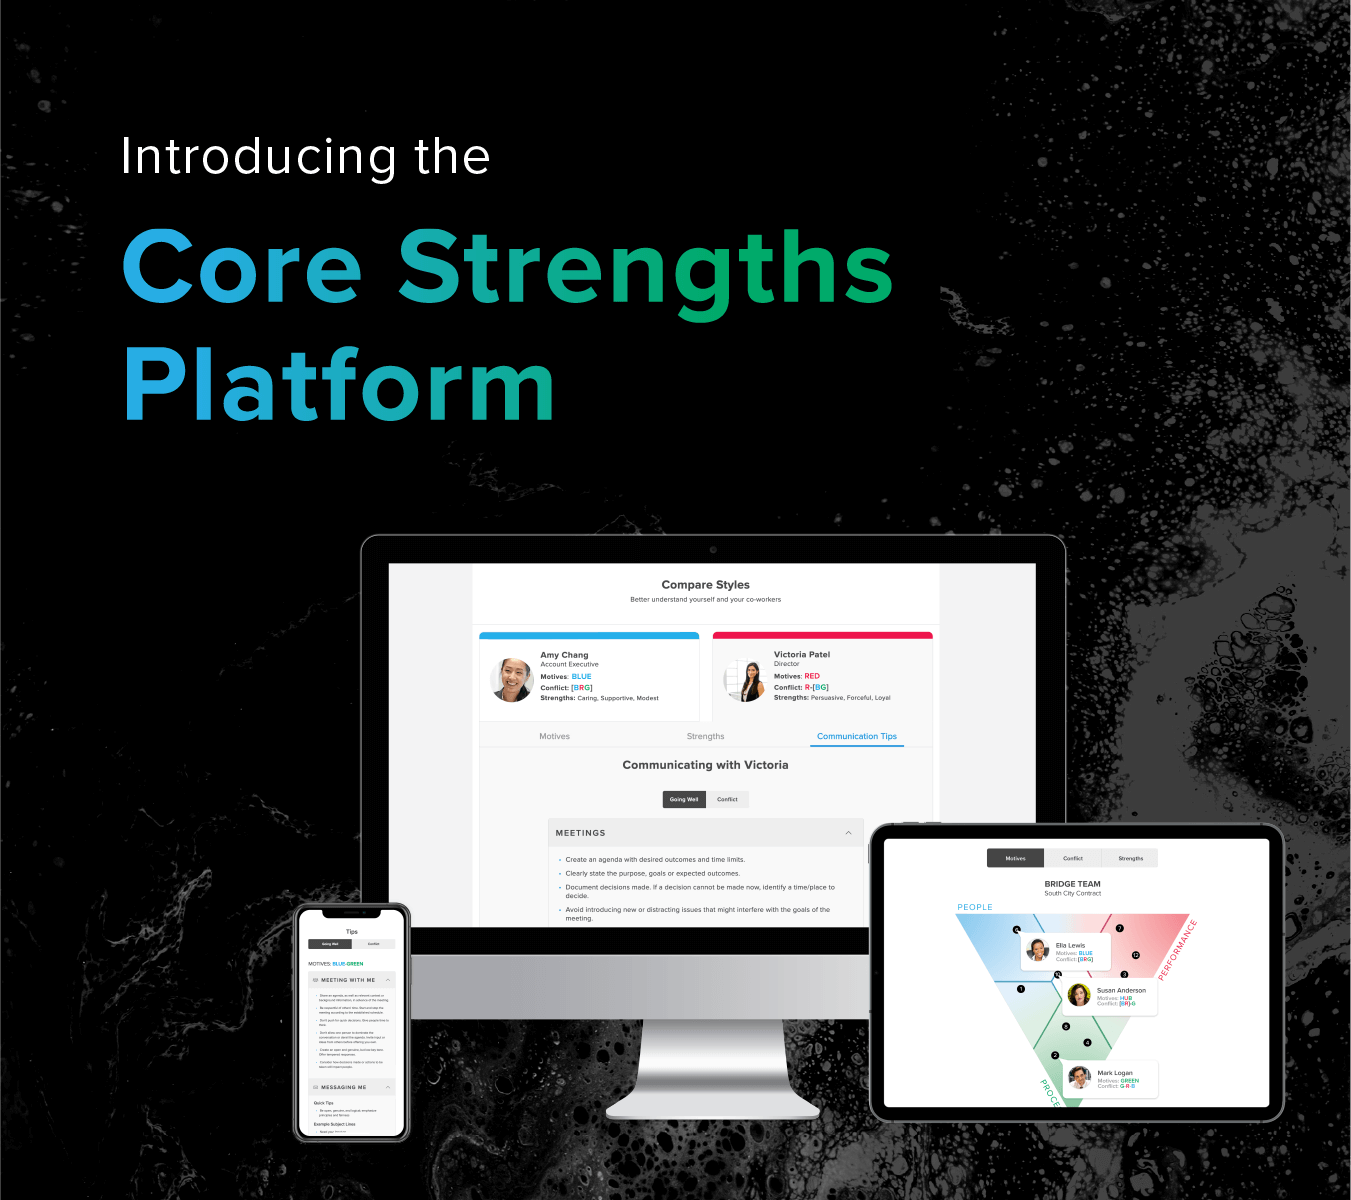 Announcing the new Core Strengths Platform, providing Relationship Intelligence across desktop, tablet, and mobile devices.